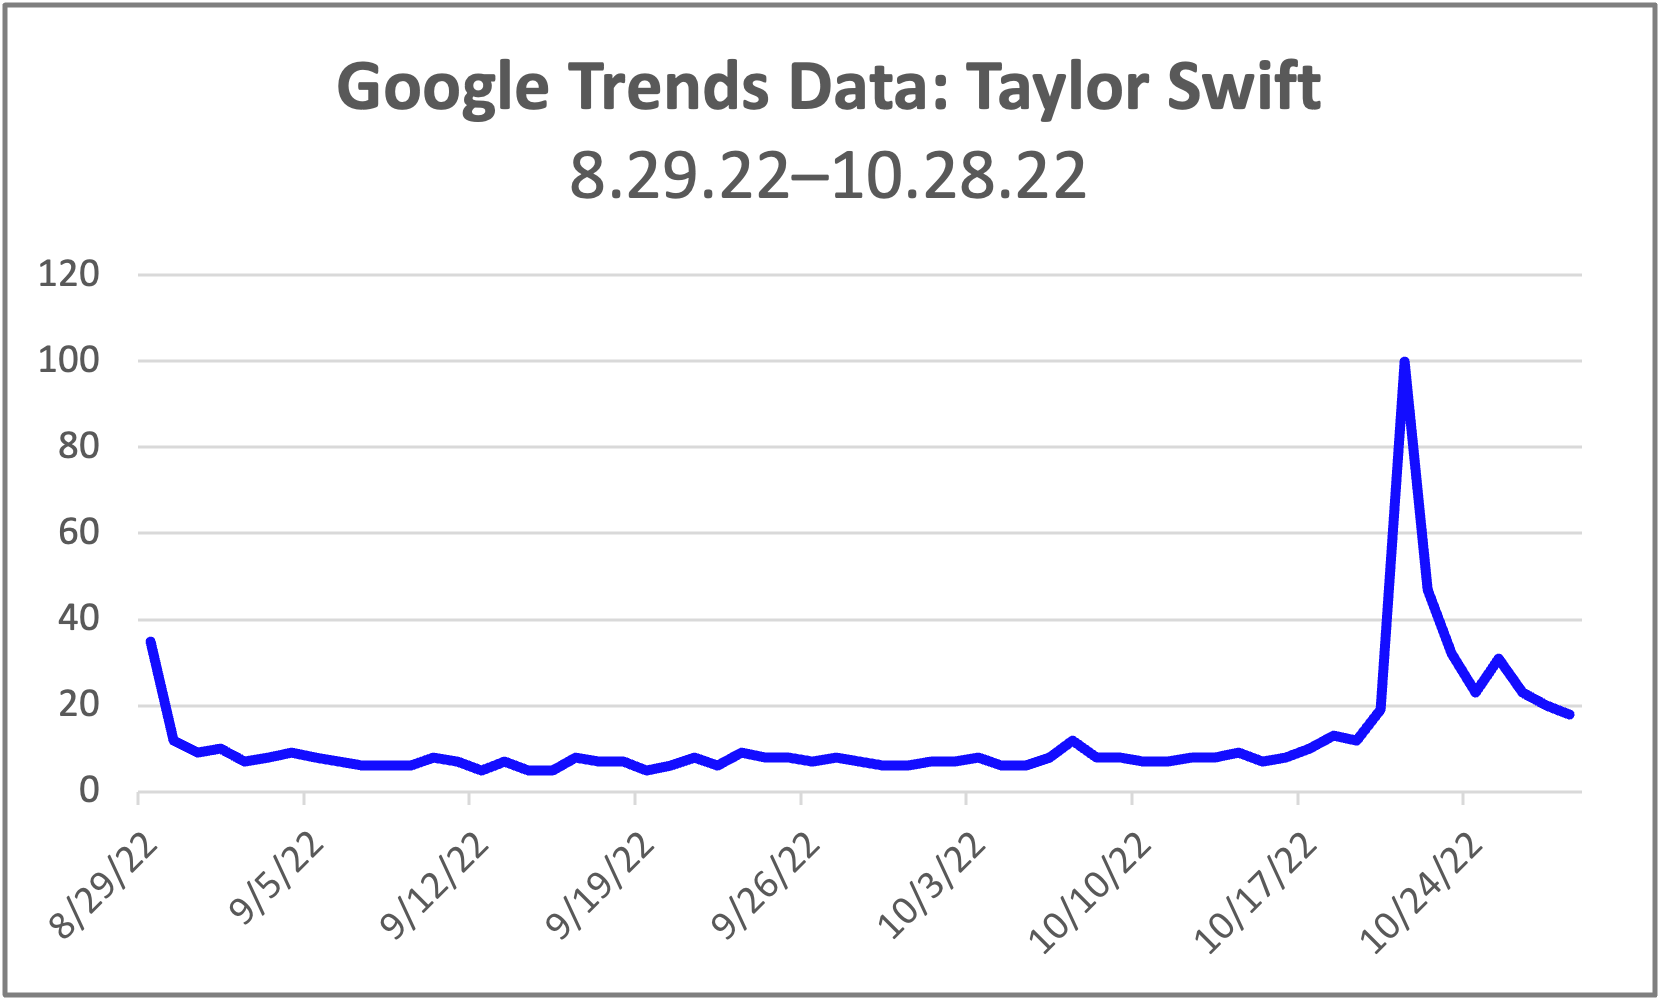 Taylor Swift: Master of the Product Launch